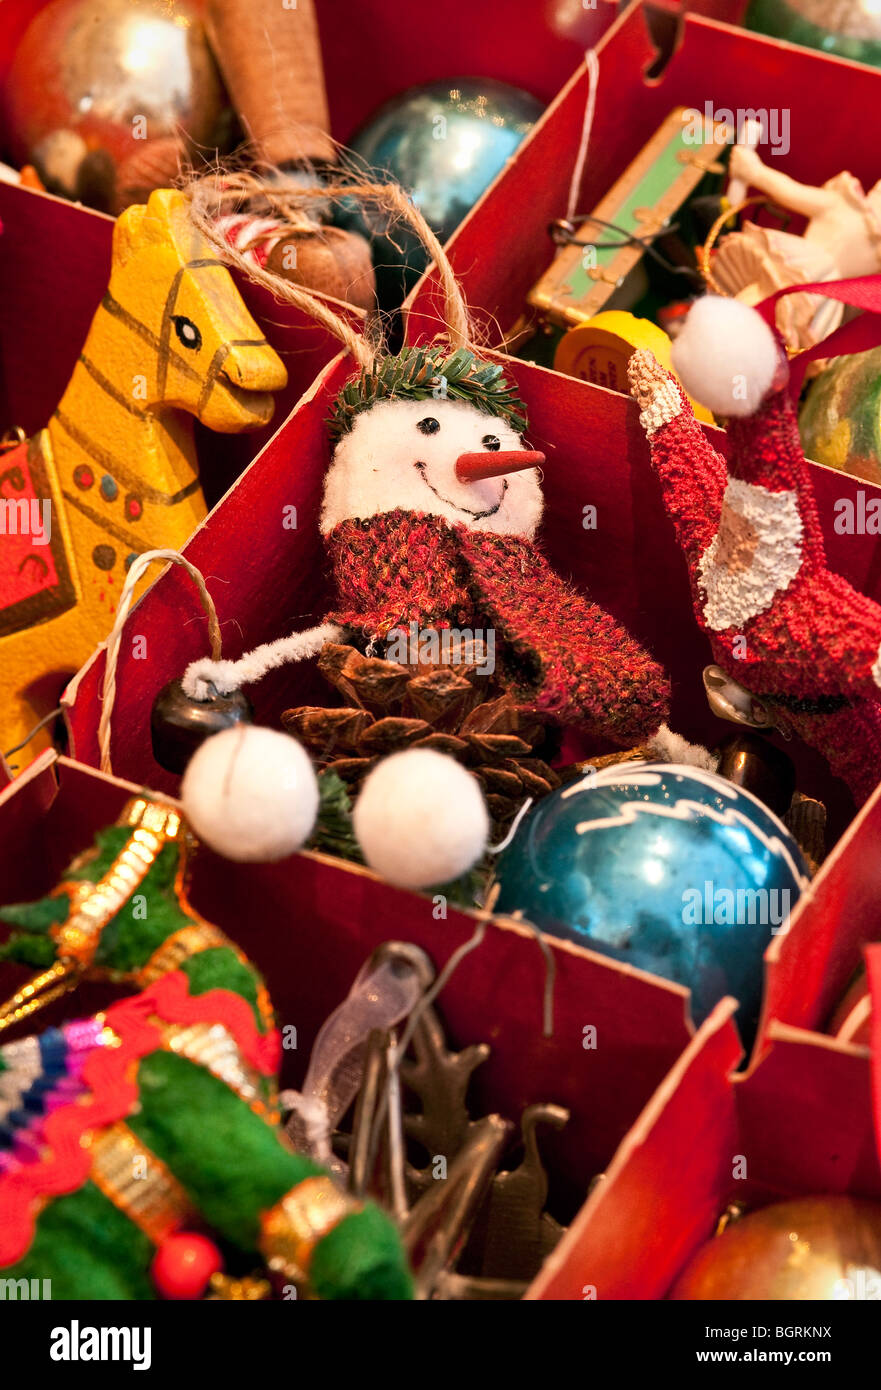 Christmas tree ornaments and decorations. Stock Photo